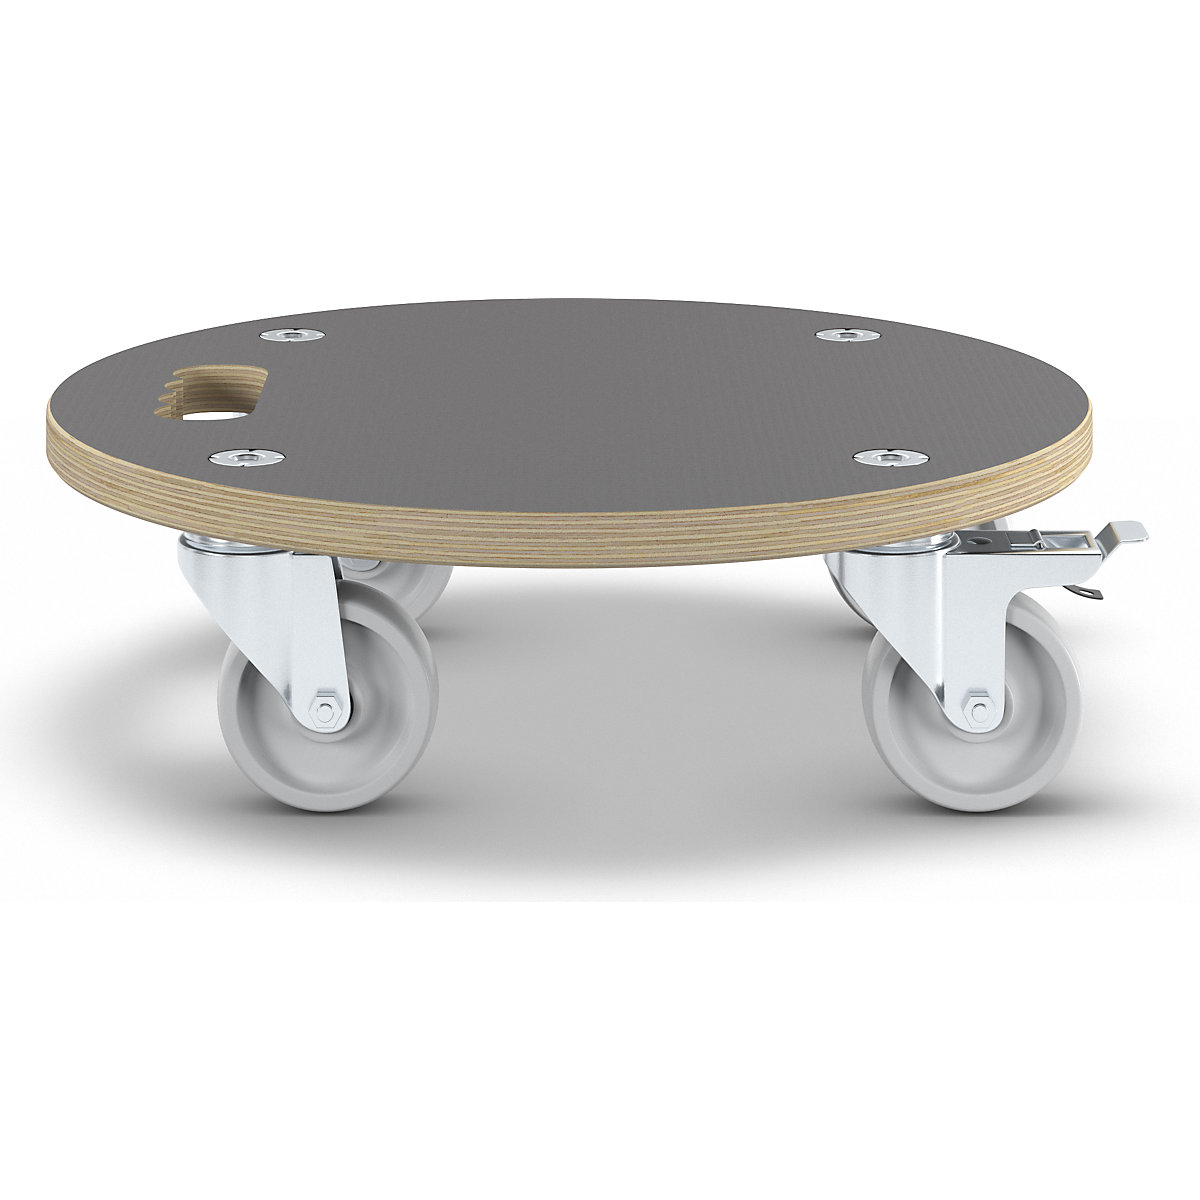 MaxiGRIP transport dolly – Wagner (Product illustration 7)-6